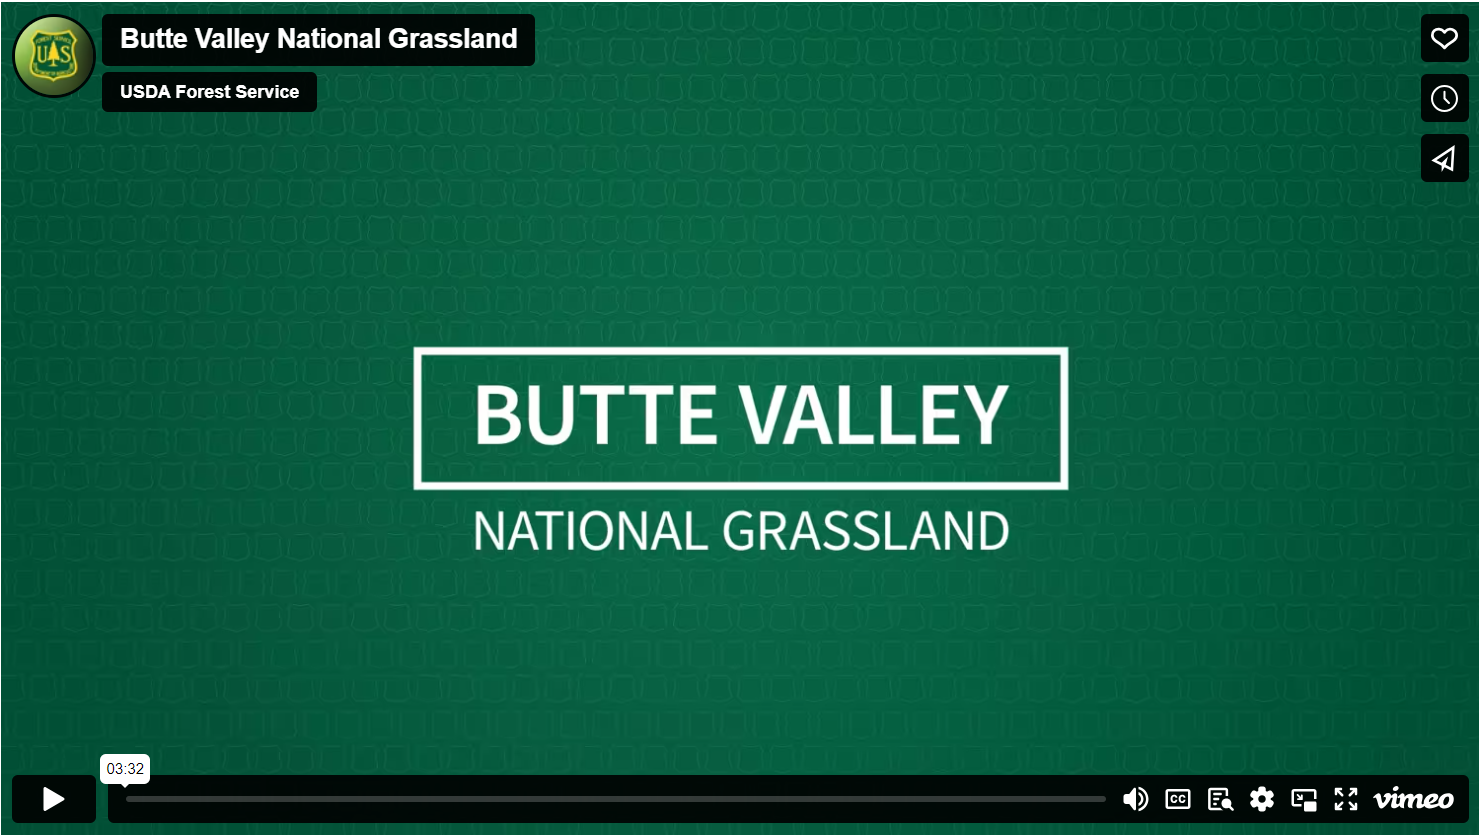 Video player for Forest News Episode 22 on the topic of Butte Valley National Grassland